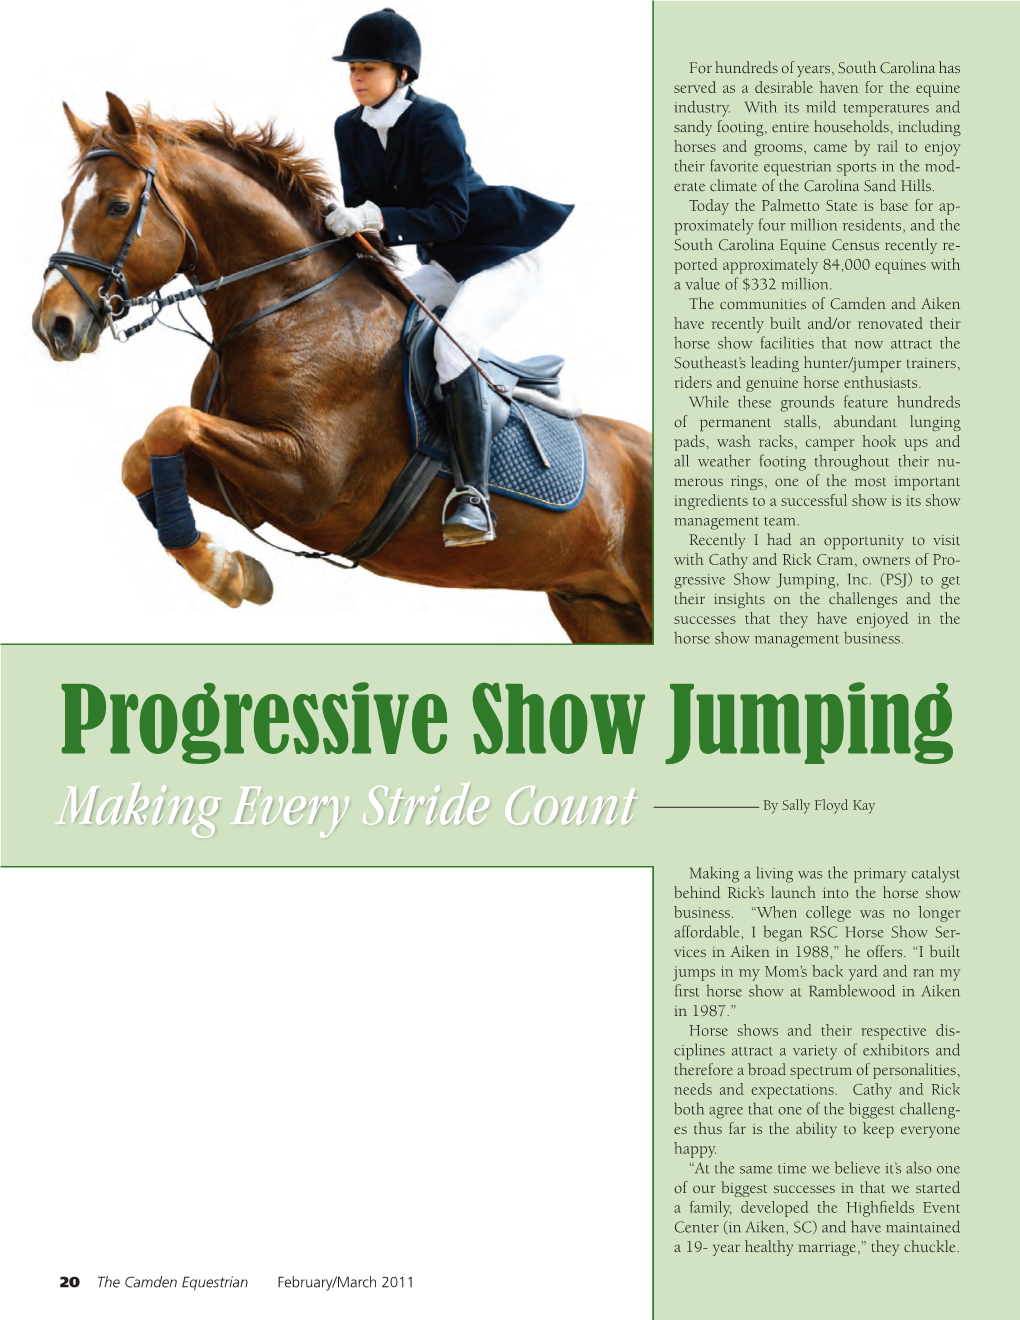 Progressive Show Jumping Feature Article